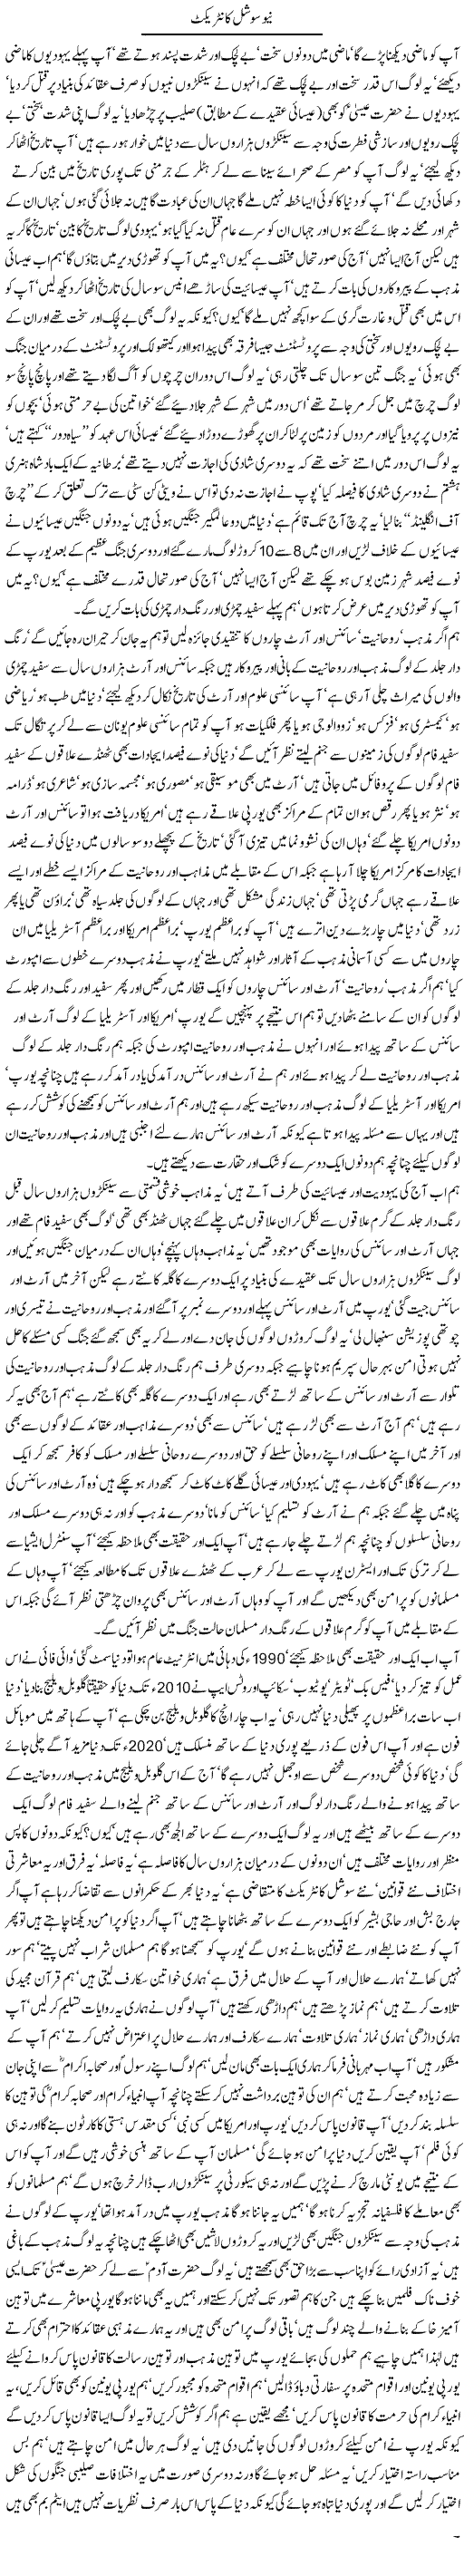 New Social Contract by Javed Chaudhry